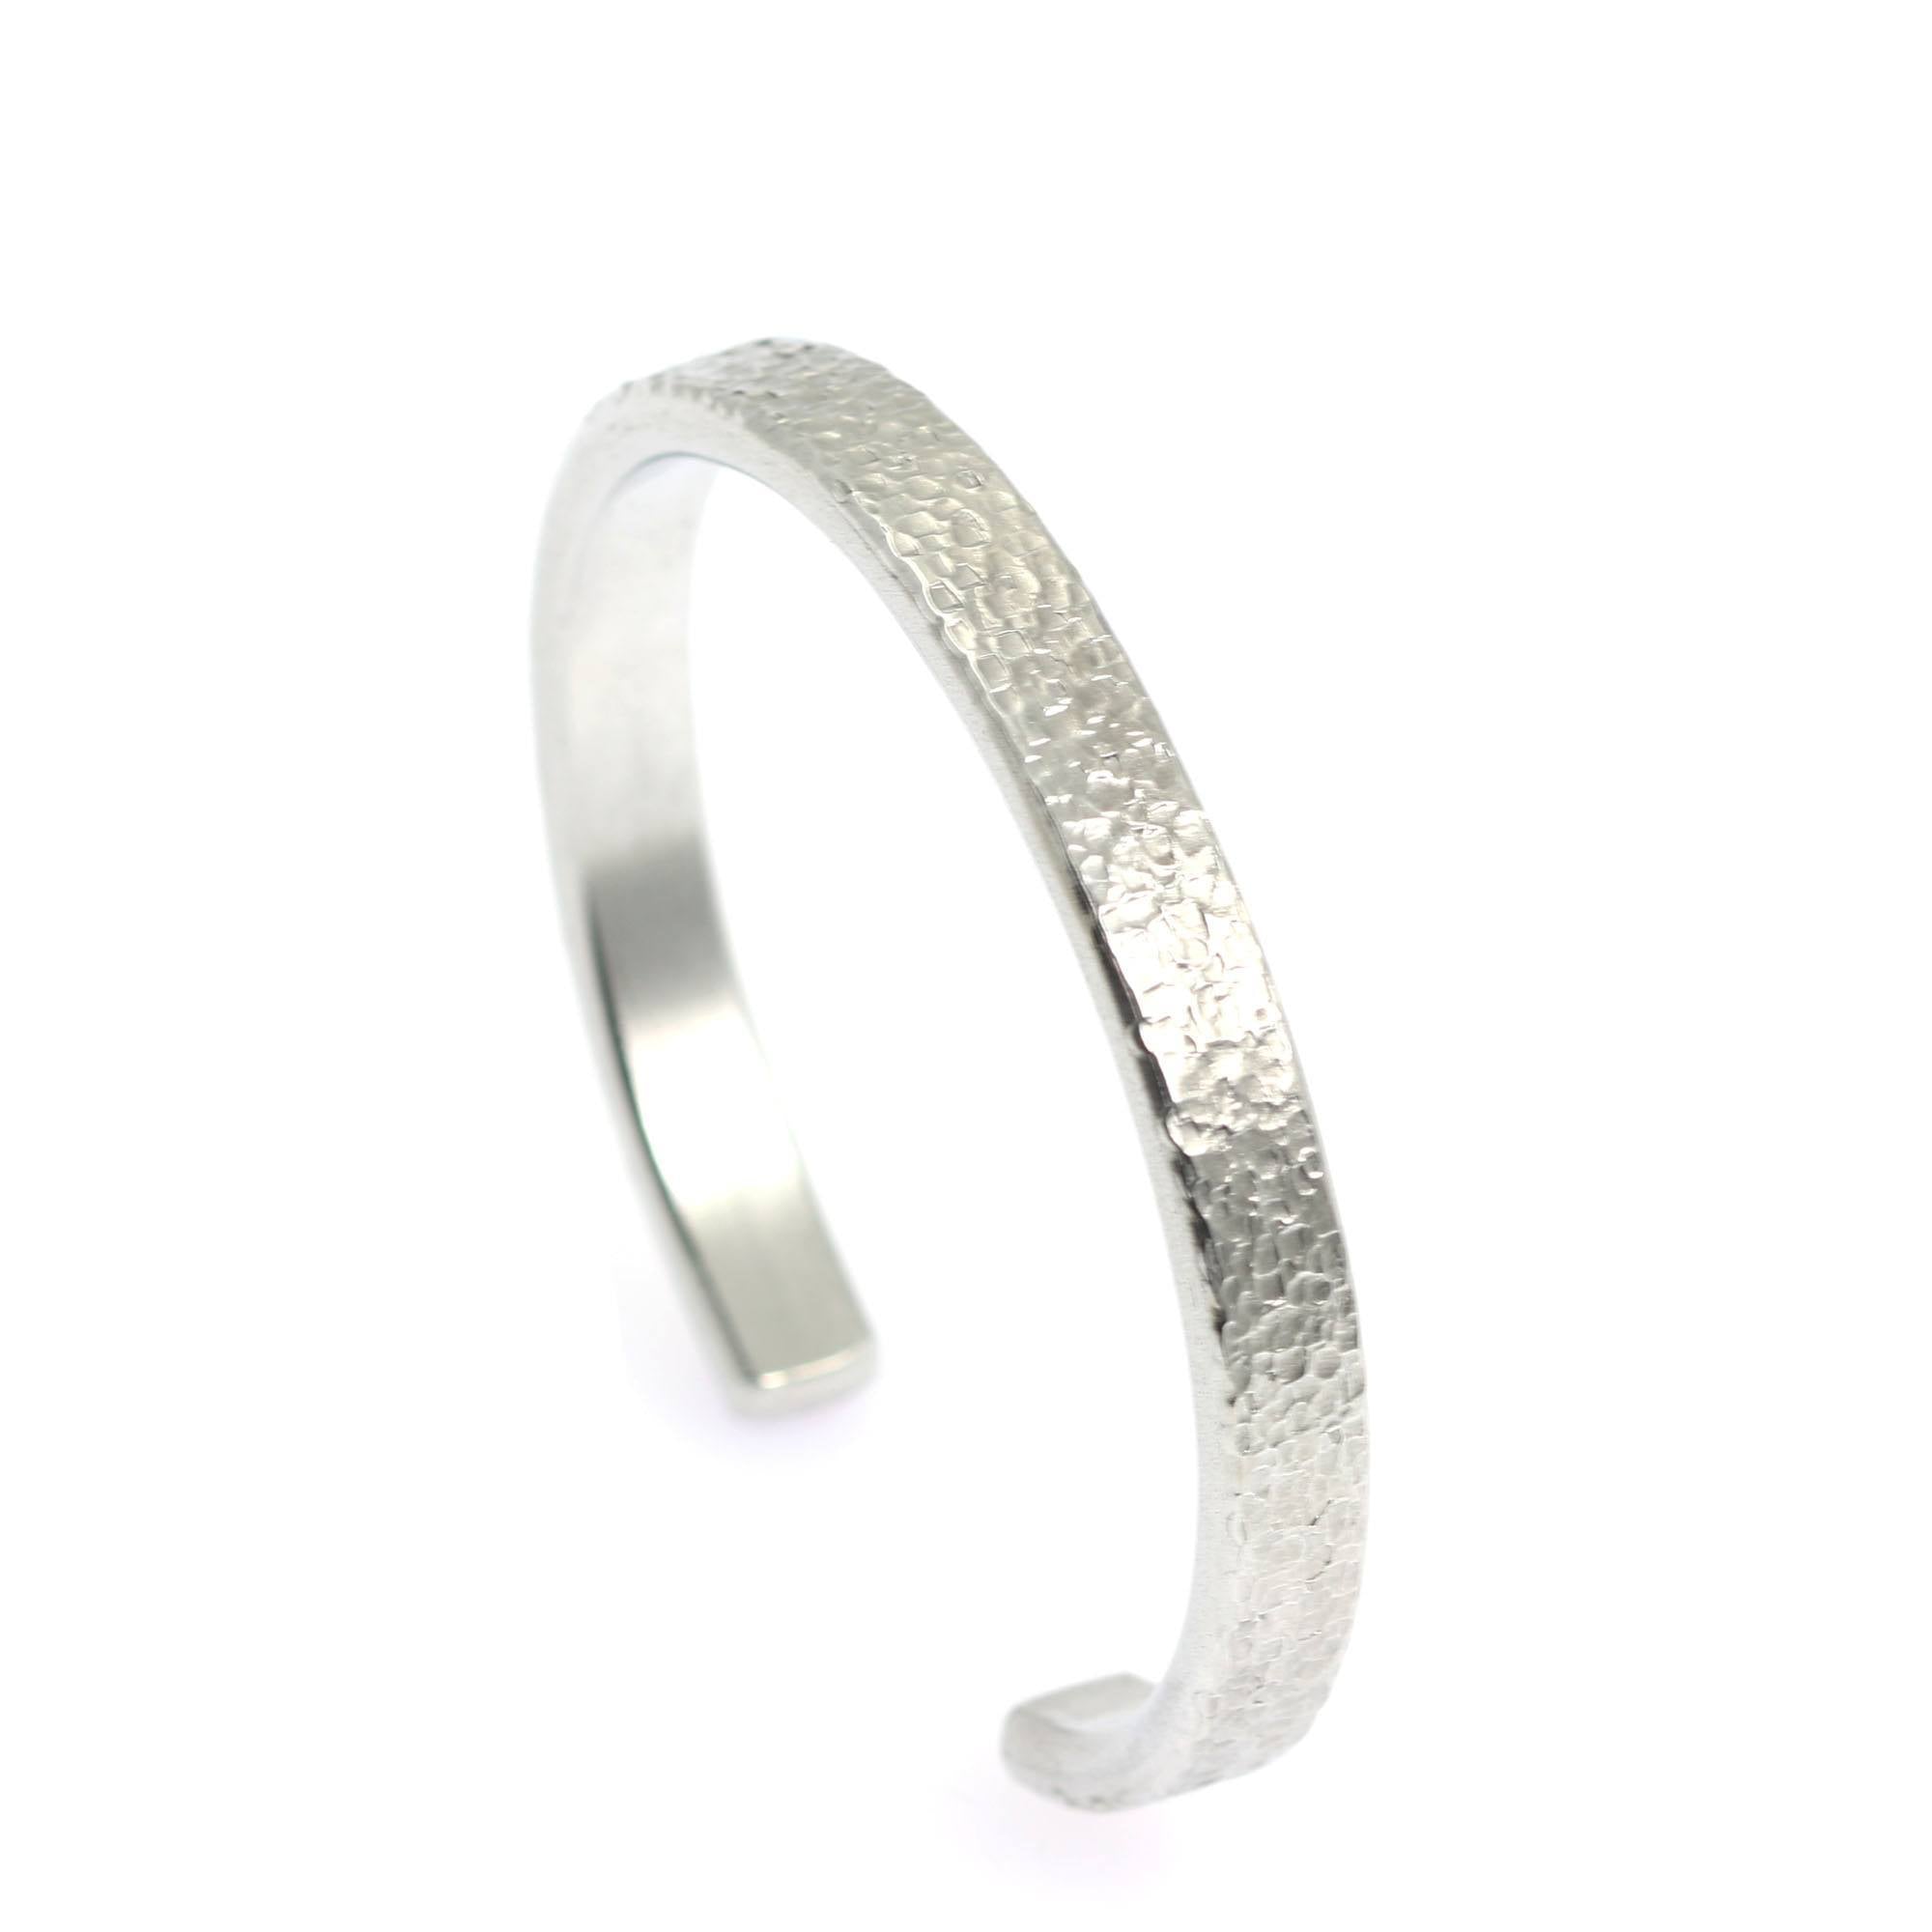 Right View of Thin Texturized Aluminum Cuff Bracelet